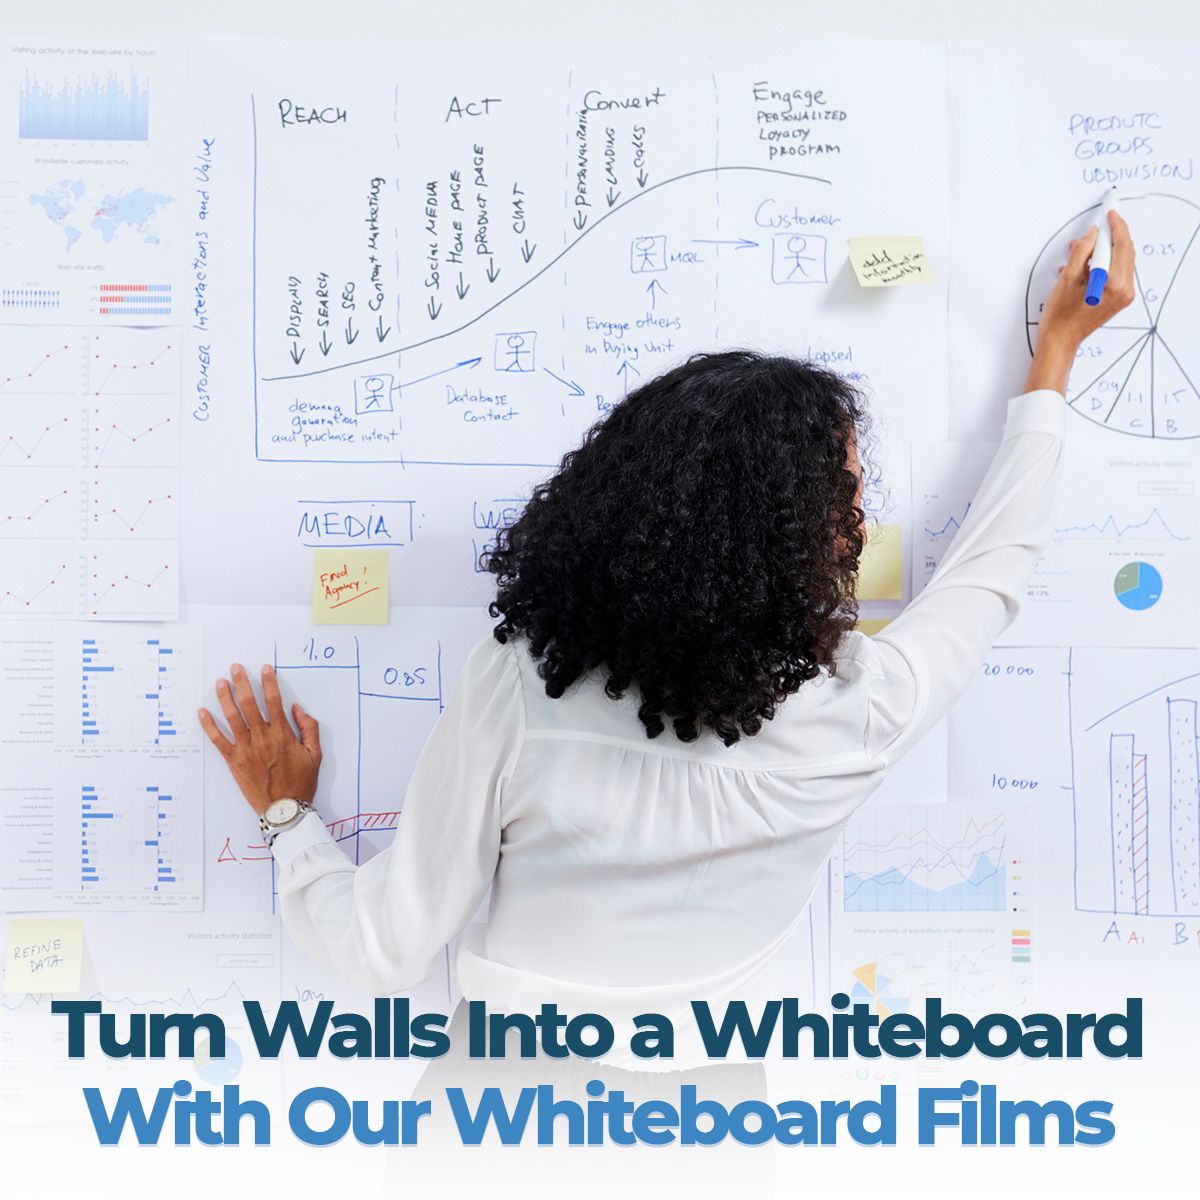 Turn Walls Into a Whiteboard With Our Whiteboard Films